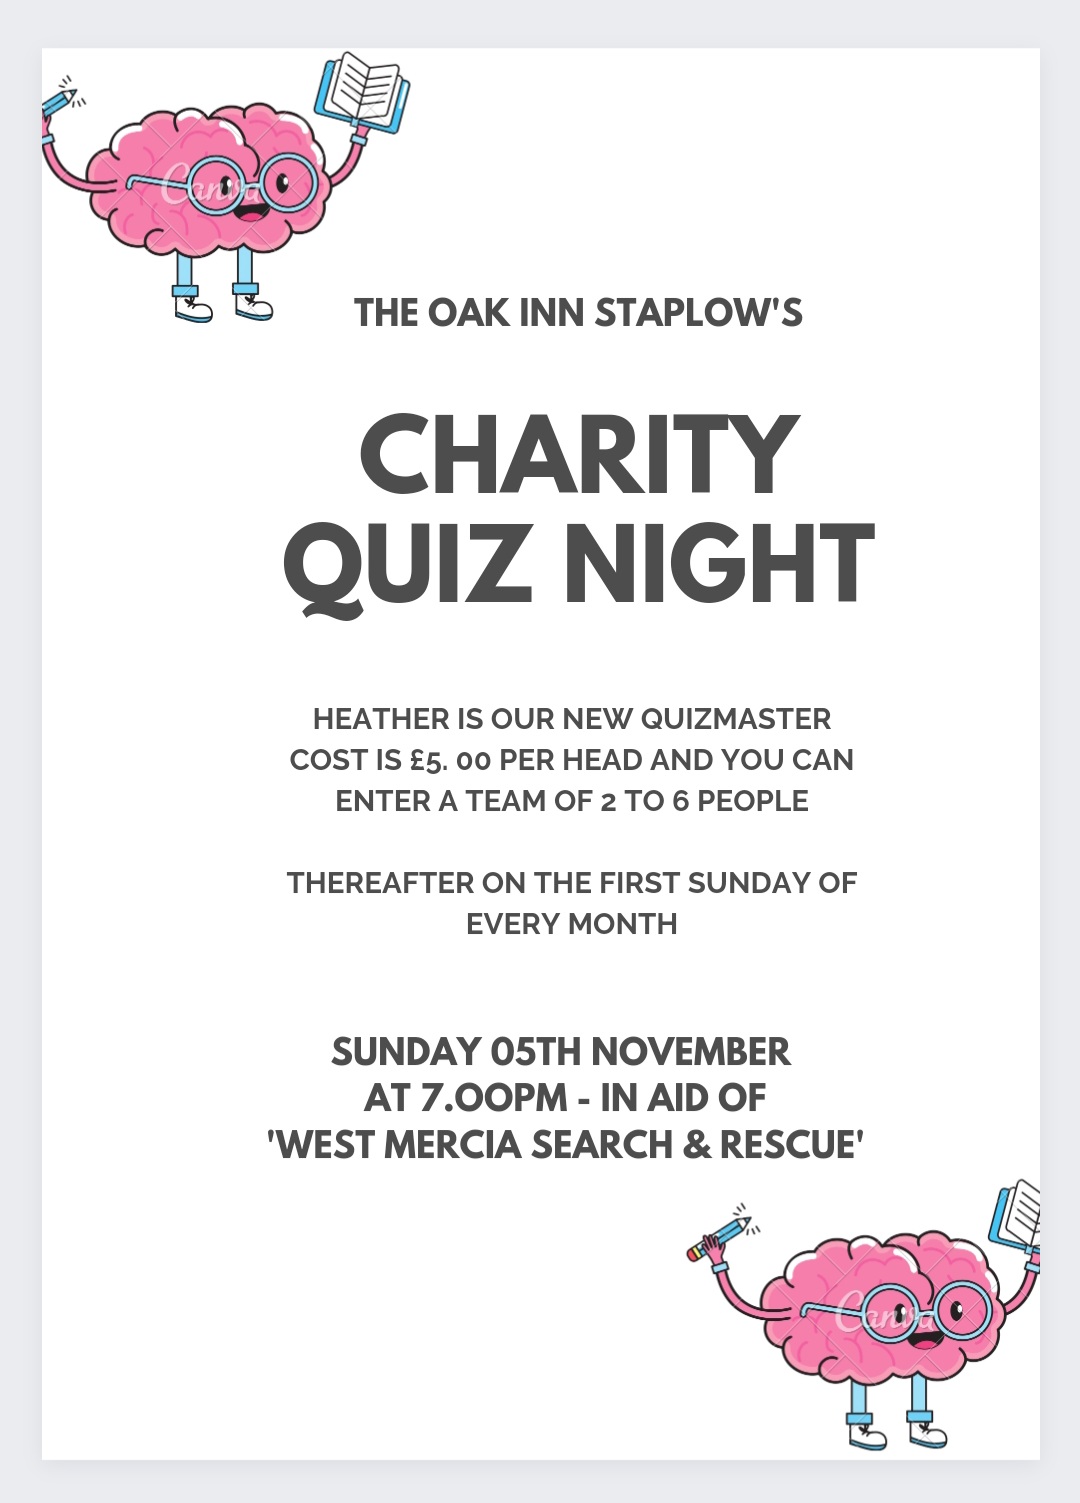 Join Heather our new Quizmaster for our next quiz on Sunday 05th November at 7.00pm. Our nominated charity is 'WEST MERCIA SEARCH & RESCUE'